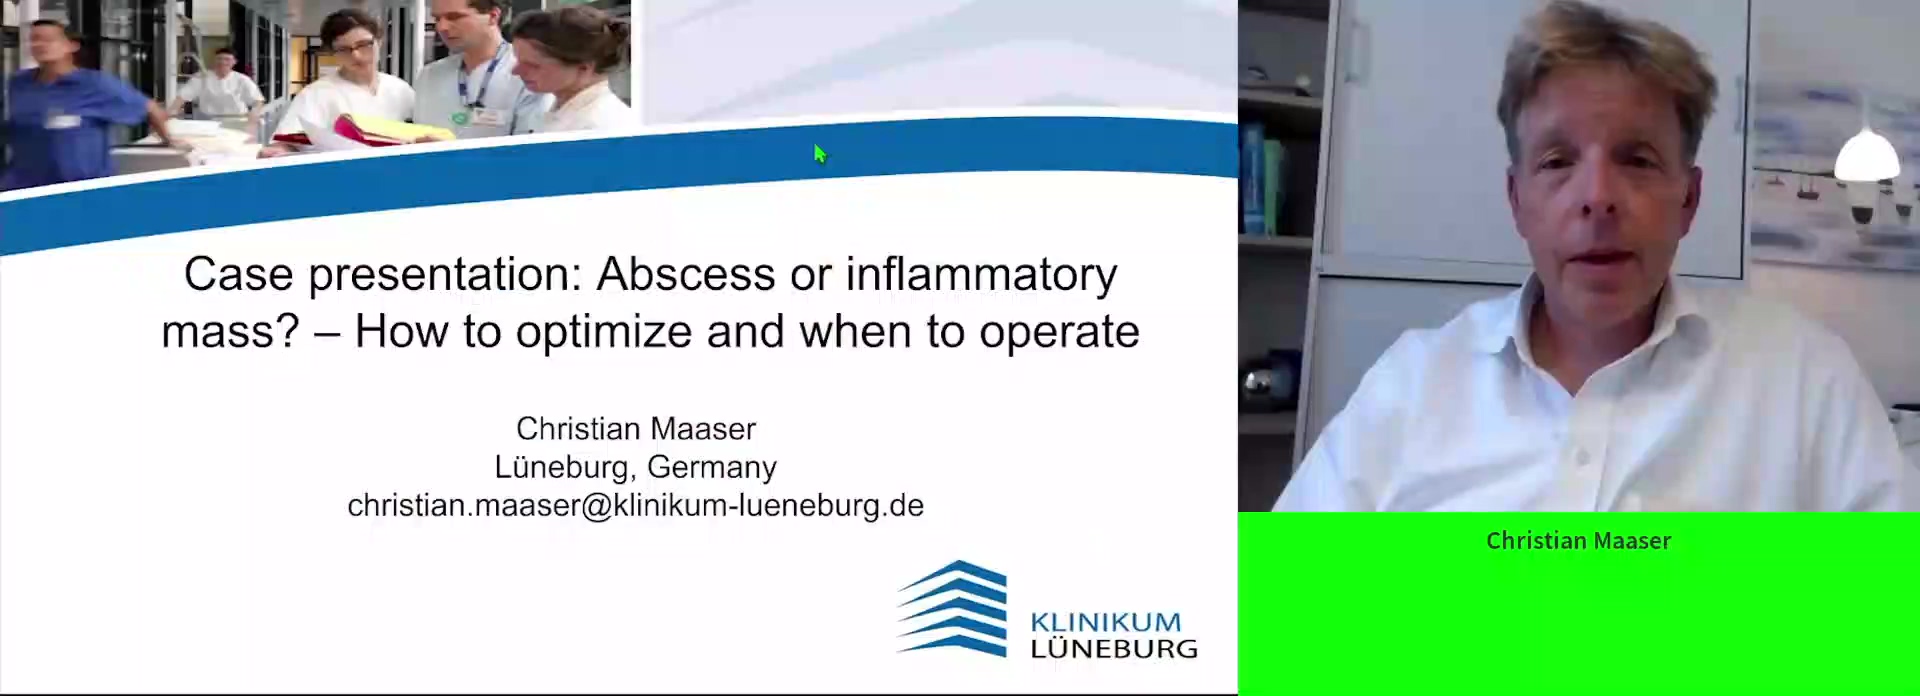 Abscess or inflammatory mass? How to optimise and when to operate